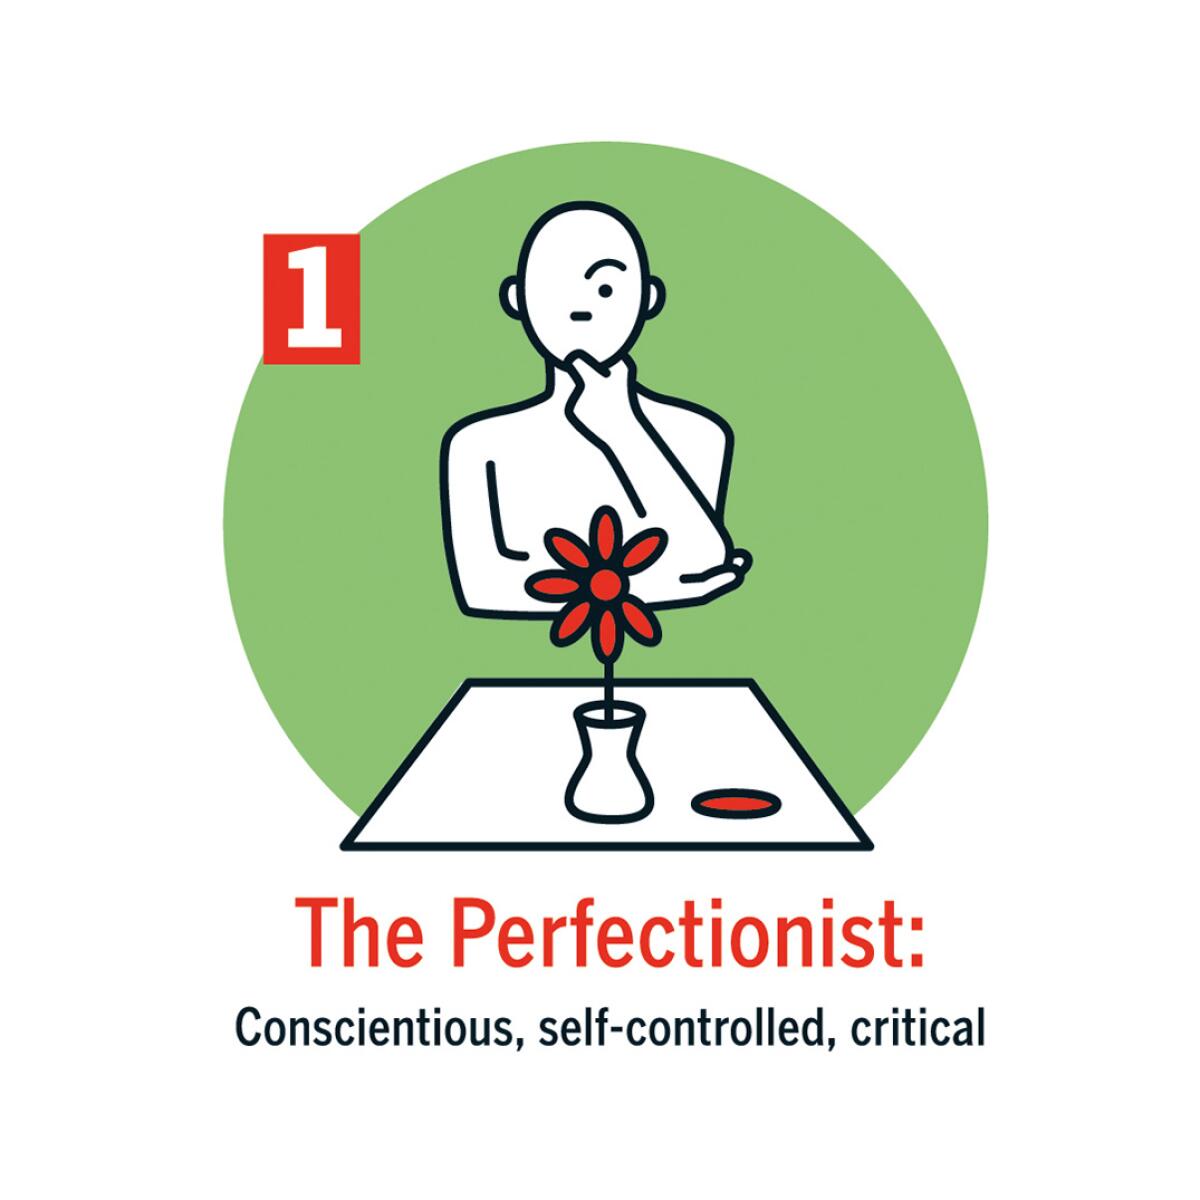 "The Perfectionist" is self-controlled, critical.